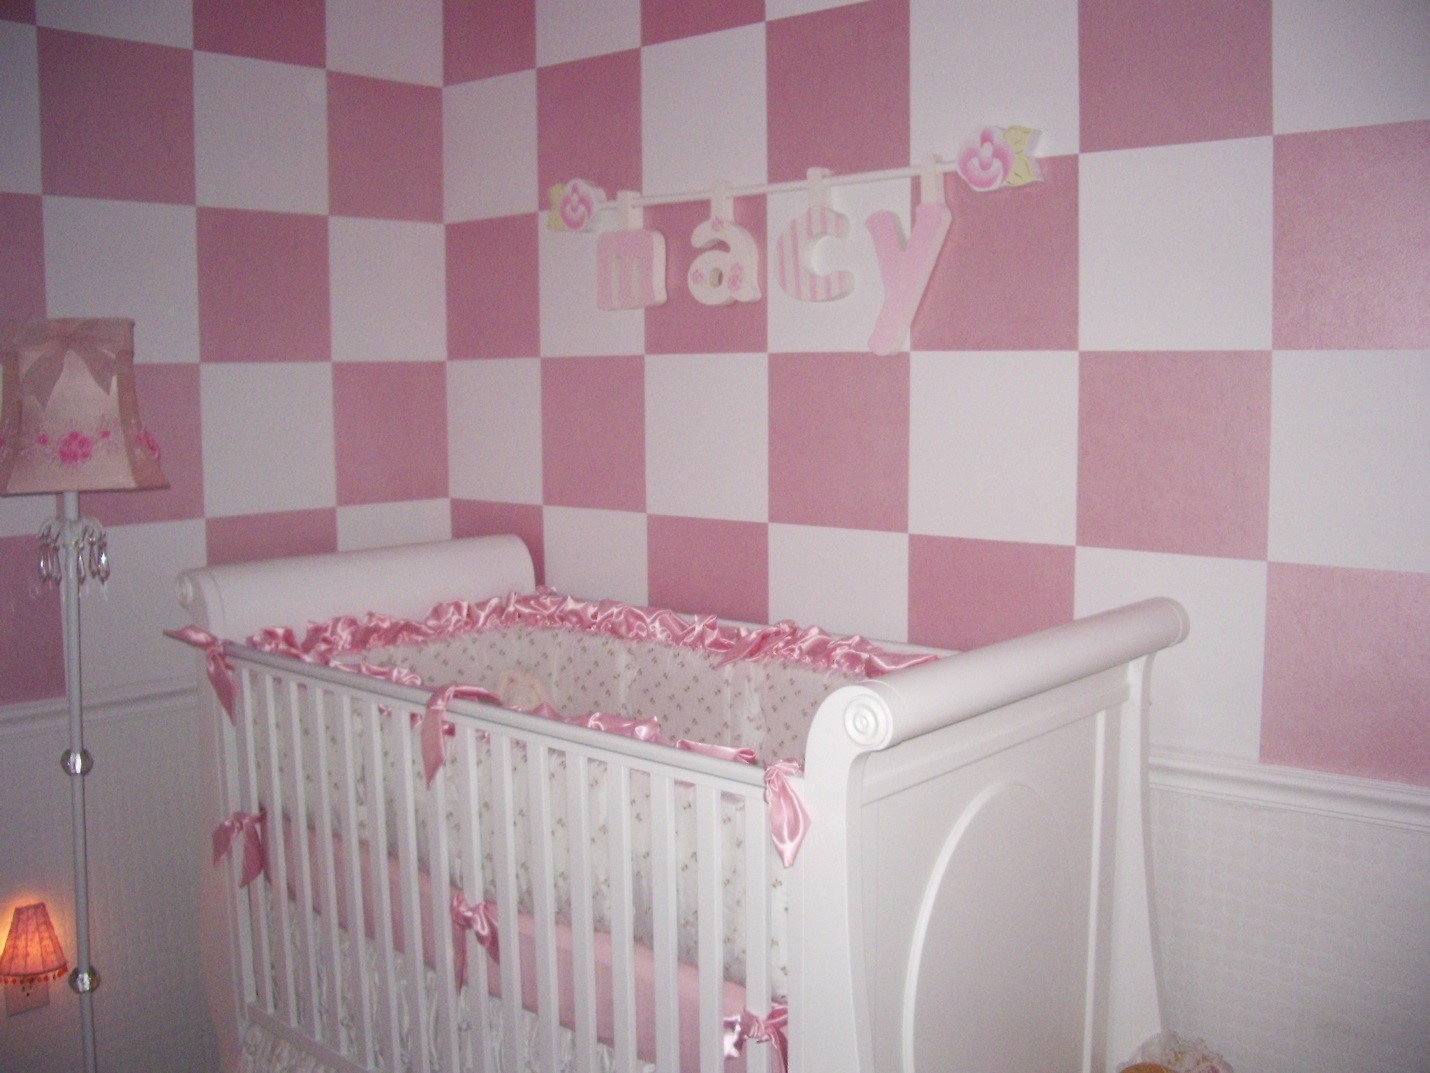 Macy's Nursery is painted in pearlized pink checkerboard